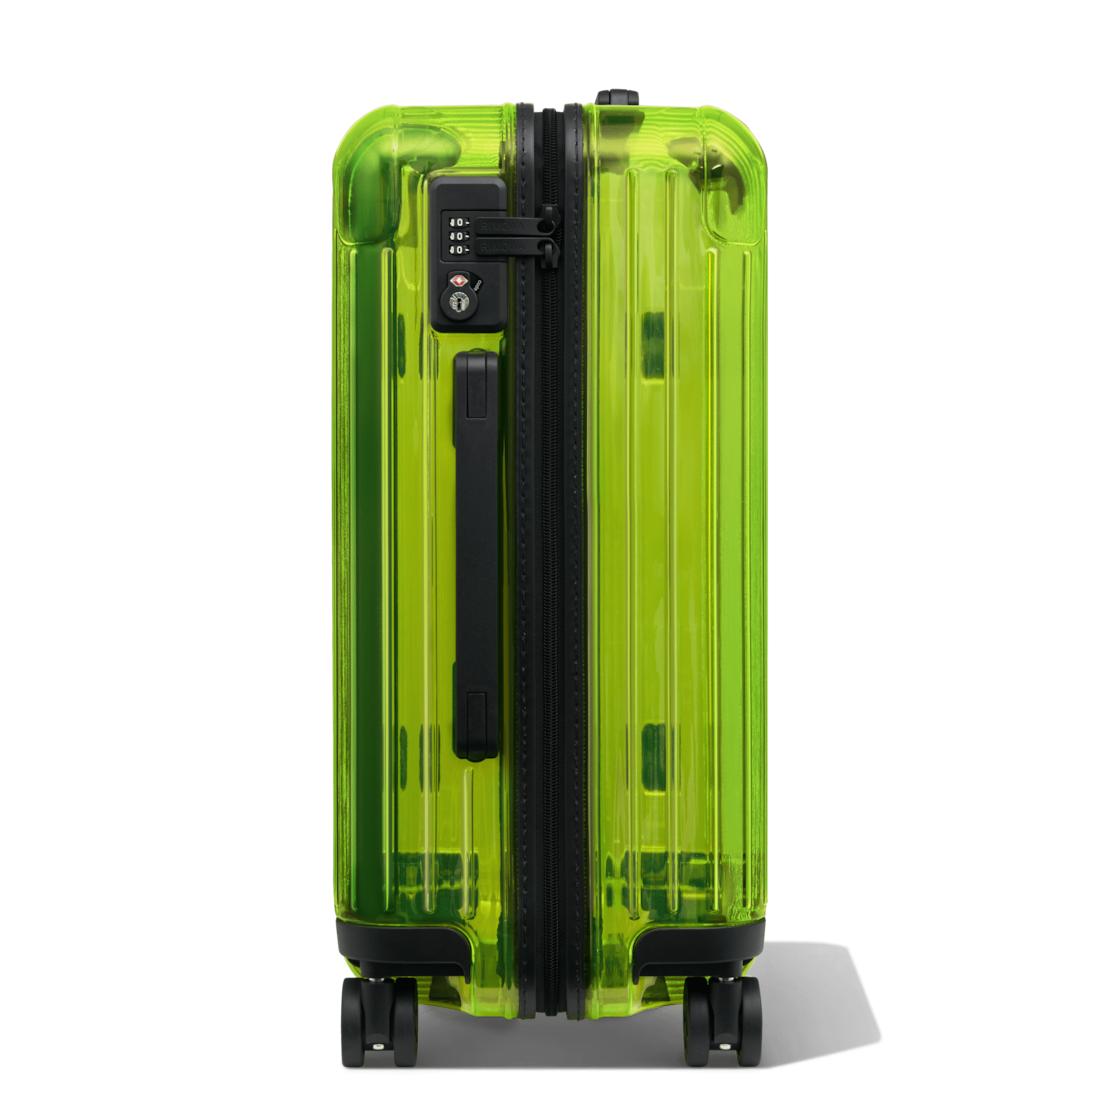 Rimowa Essential Cabin S Carry-On Suitcase in Green Gloss - Polycarbonate - 21,7x15,4x7,9